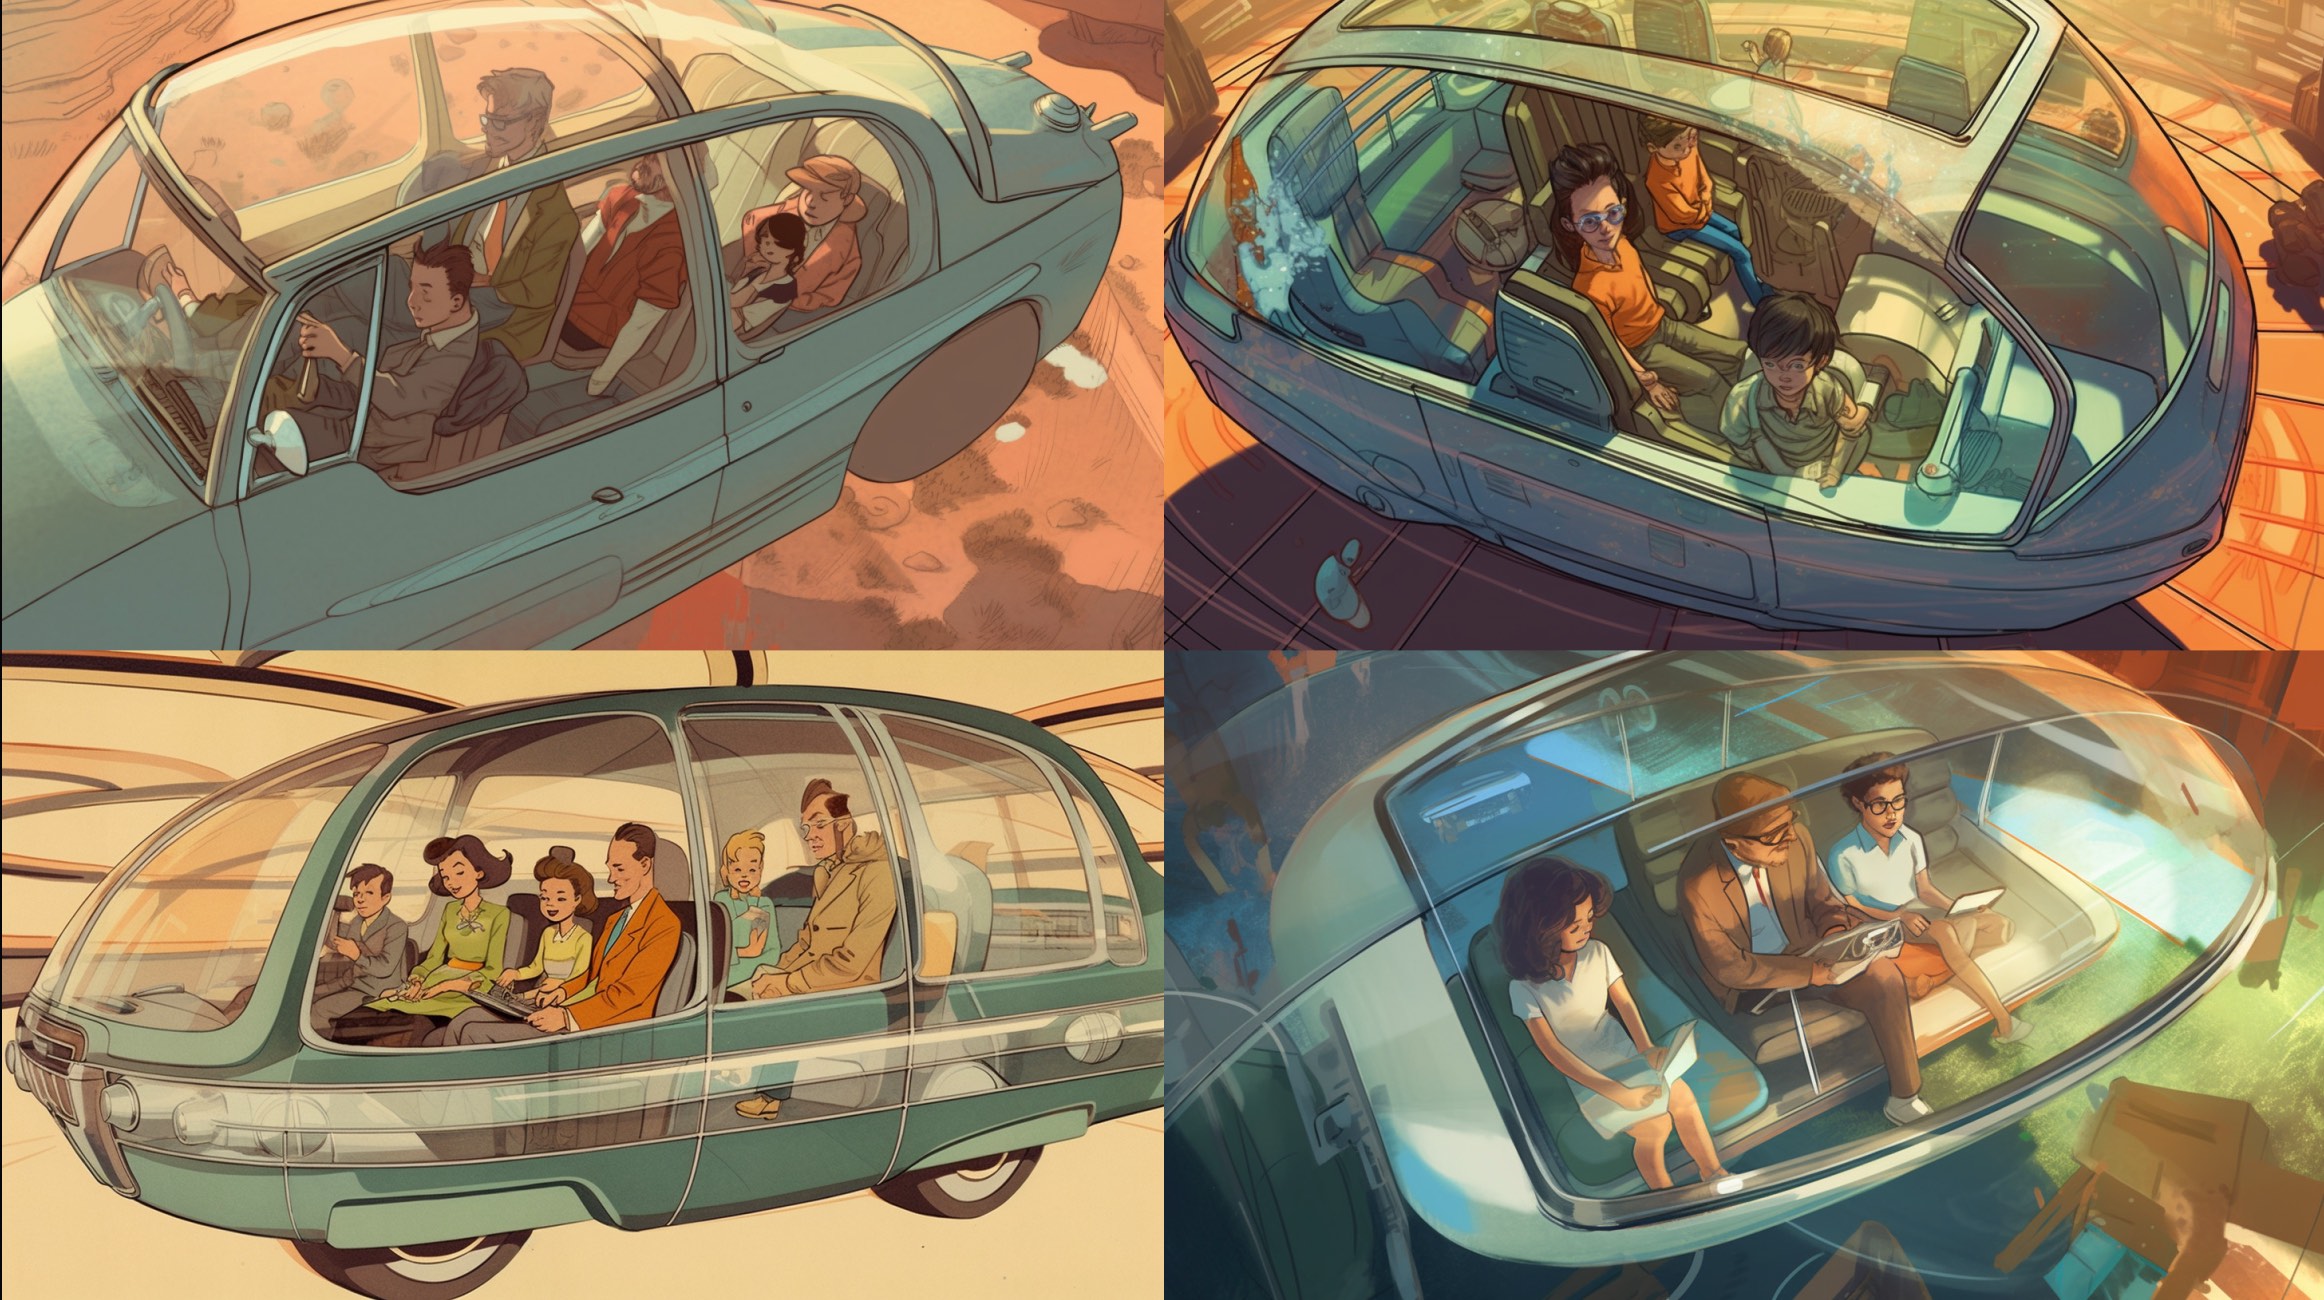 A captivating retrofuturistic illustration inspired by Arthur Radebaugh's visionary concept of self-driven cars, featuring a happy family of four - a couple and their two children - immersed in a game as they enjoy a ride in their autonomous vehicle. The scene is captured from a high bird's-eye perspective, allowing the viewer to peer through the car's transparent glass roof and observe the family's joyful interaction. The illustration is meticulously crafted using a high-resolution digital format, with a graphic tablet and advanced illustration software to emulate Radebaugh's distinctive artistic style and attention to detail. The color palette reflects the retrofuturistic theme, combining warm, nostalgic tones with vibrant hues that capture the sense of innovation and progress. The self-driving car's design is sleek and streamlined, showcasing advanced technology and a spacious interior that provides ample room for the family to relax and engage in leisurely activities. The vehicle effortlessly navigates a modern, elevated highway that stretches out into the distance, winding its way through an imaginative cityscape of towering skyscrapers and avant-garde architecture. In the background, the city's skyline and infrastructure evoke a sense of wonder and possibility, with subtle retrofuturistic elements such as flying vehicles, neon signs, and cutting-edge transportation systems that exemplify the era's optimistic vision of the future. The lighting in the illustration is carefully designed, with soft, diffused sunlight casting long shadows across the elevated highway and the city below, adding depth and dimension to the scene. The warm, golden tones of the sunlight contrast with the cooler hues of the cityscape, creating a visually striking composition. This engaging and masterfully executed illustration pays tribute to Arthur Radebaugh's original ideas while offering a contemporary reinterpretation, envisioning a future where autonomous vehicles transform the way families travel and connect with one another. --ar 16:9